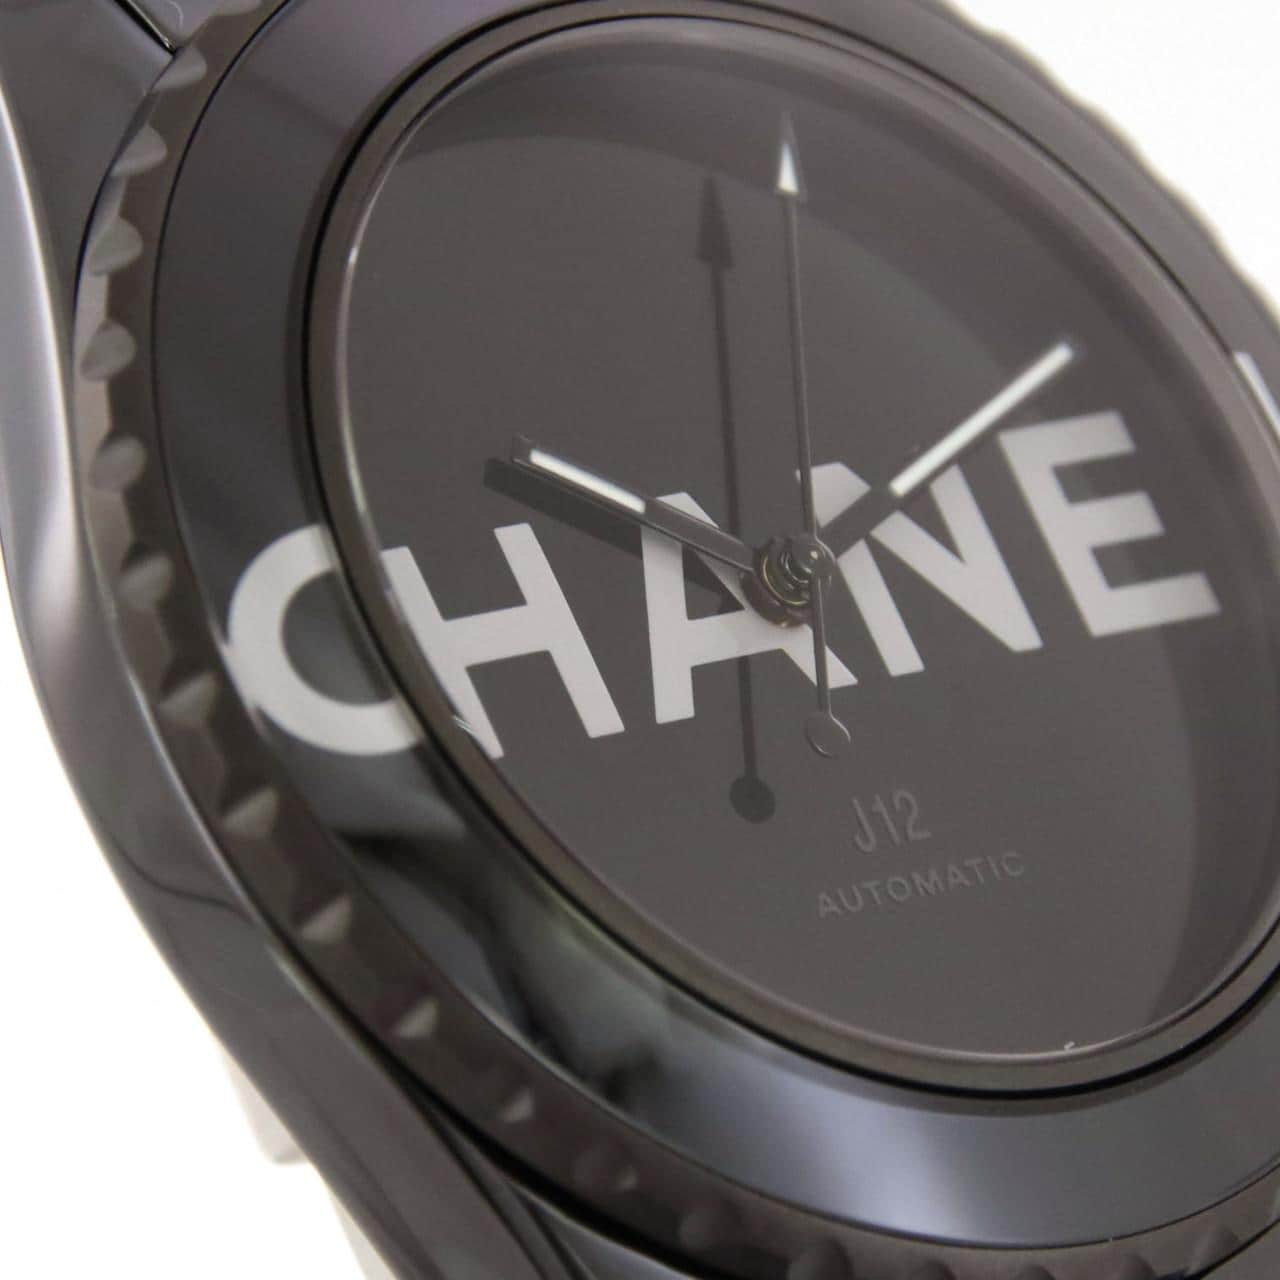 CHANEL J12 Wanted Du CHANEL 38mm Ceramic LIMITED H7418 Ceramic Automatic